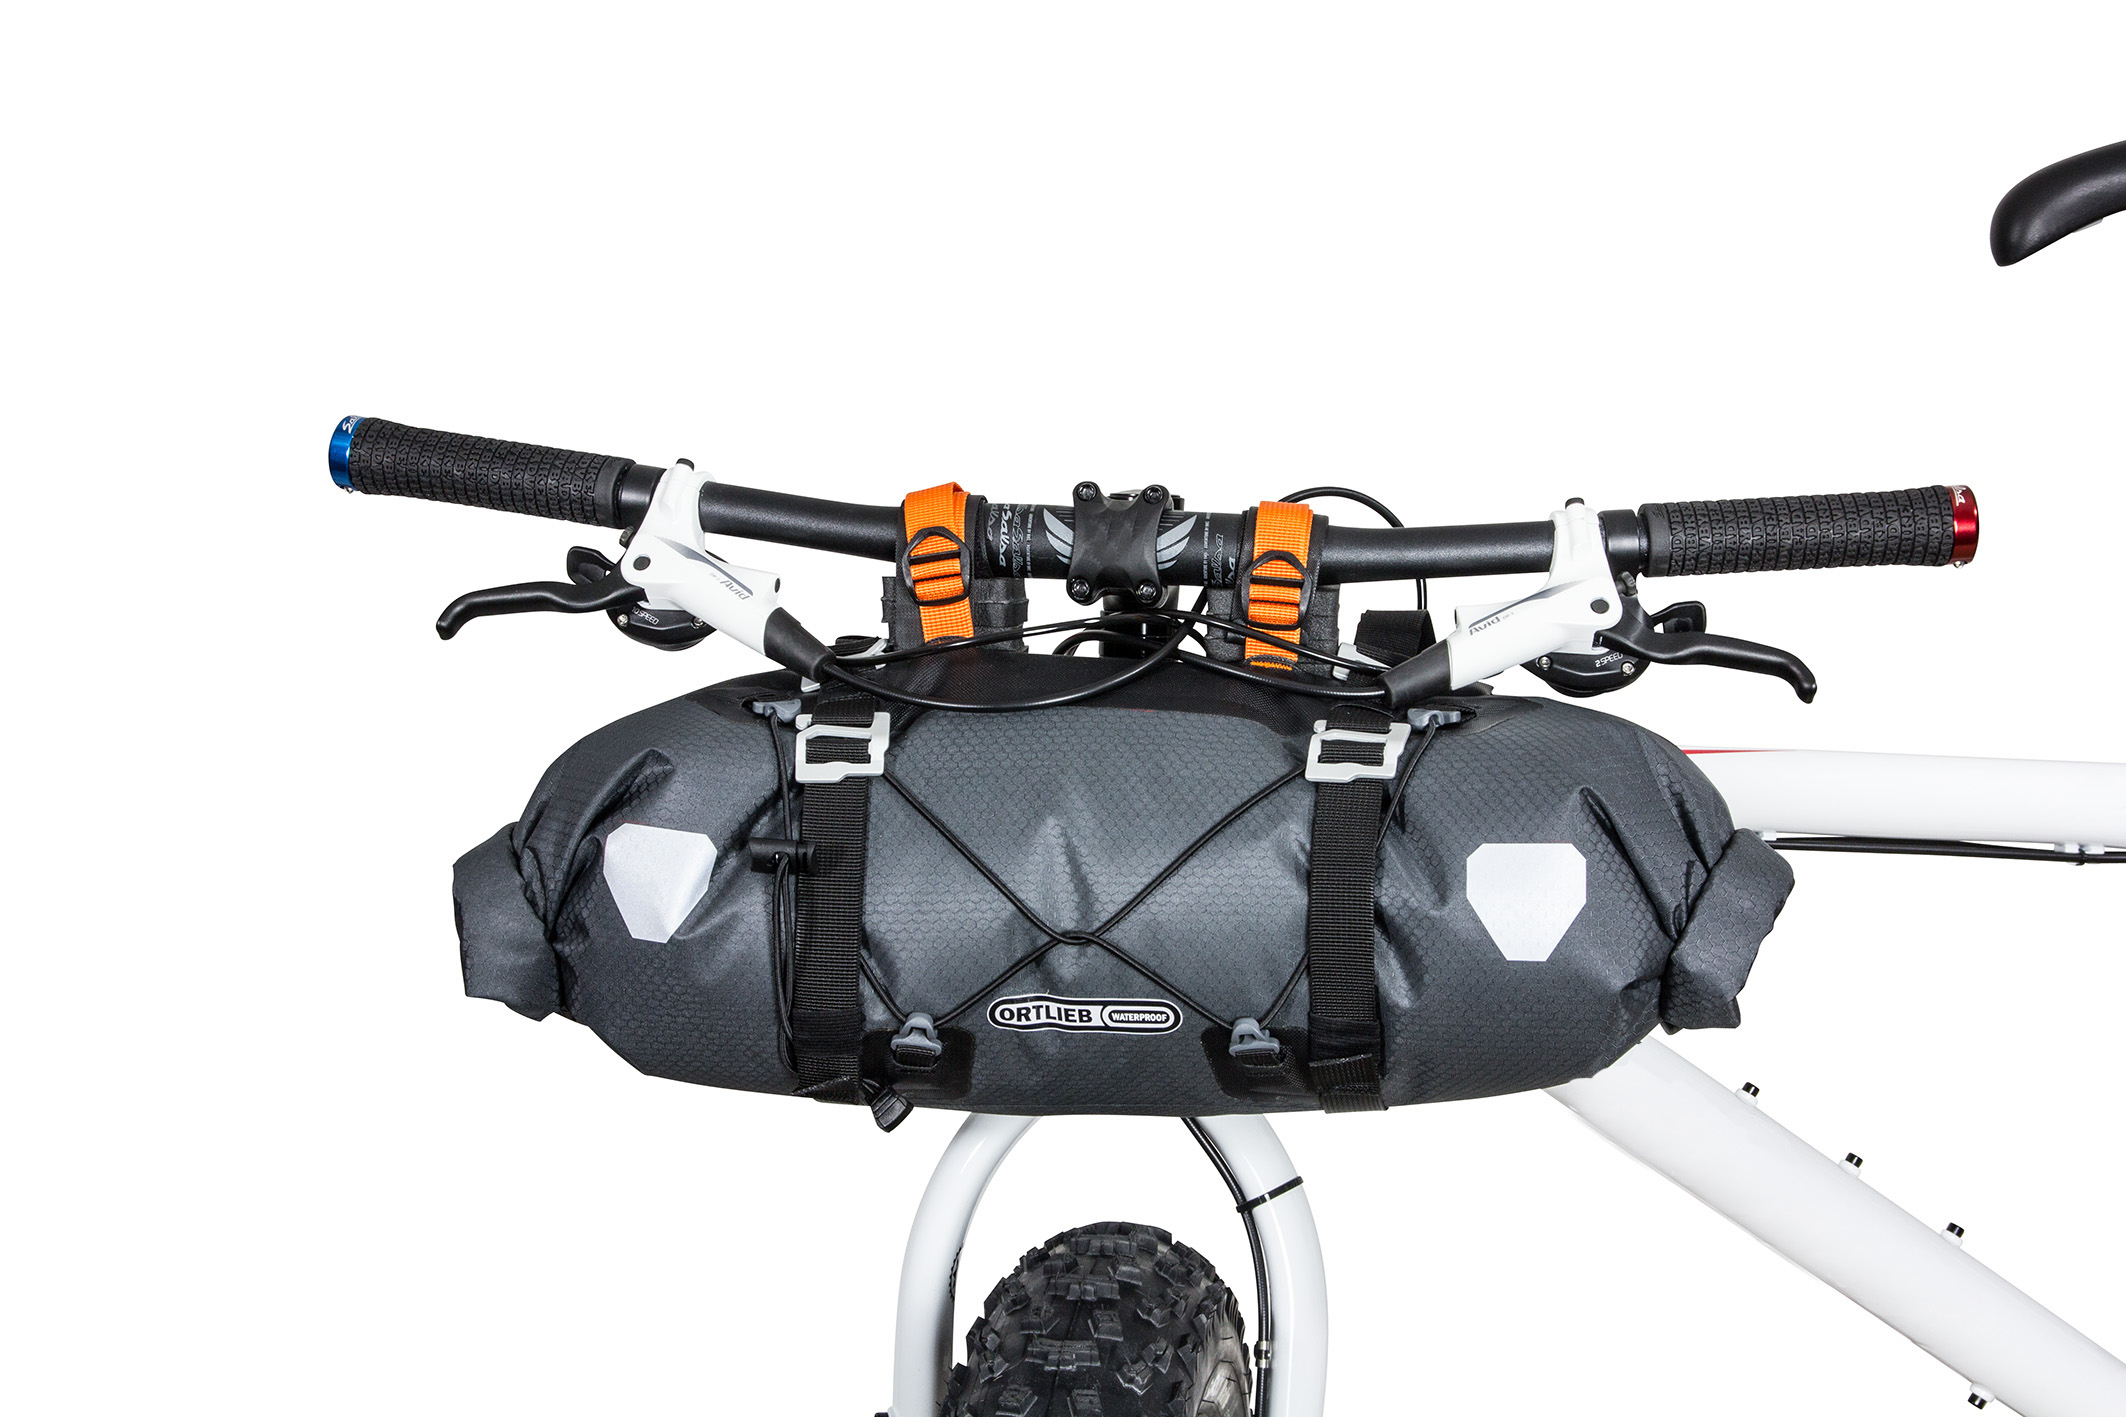 Ortlieb Adds To Bike Packing Collection With New Frame Bags Adds Rack Top Cooler More Bikerumor